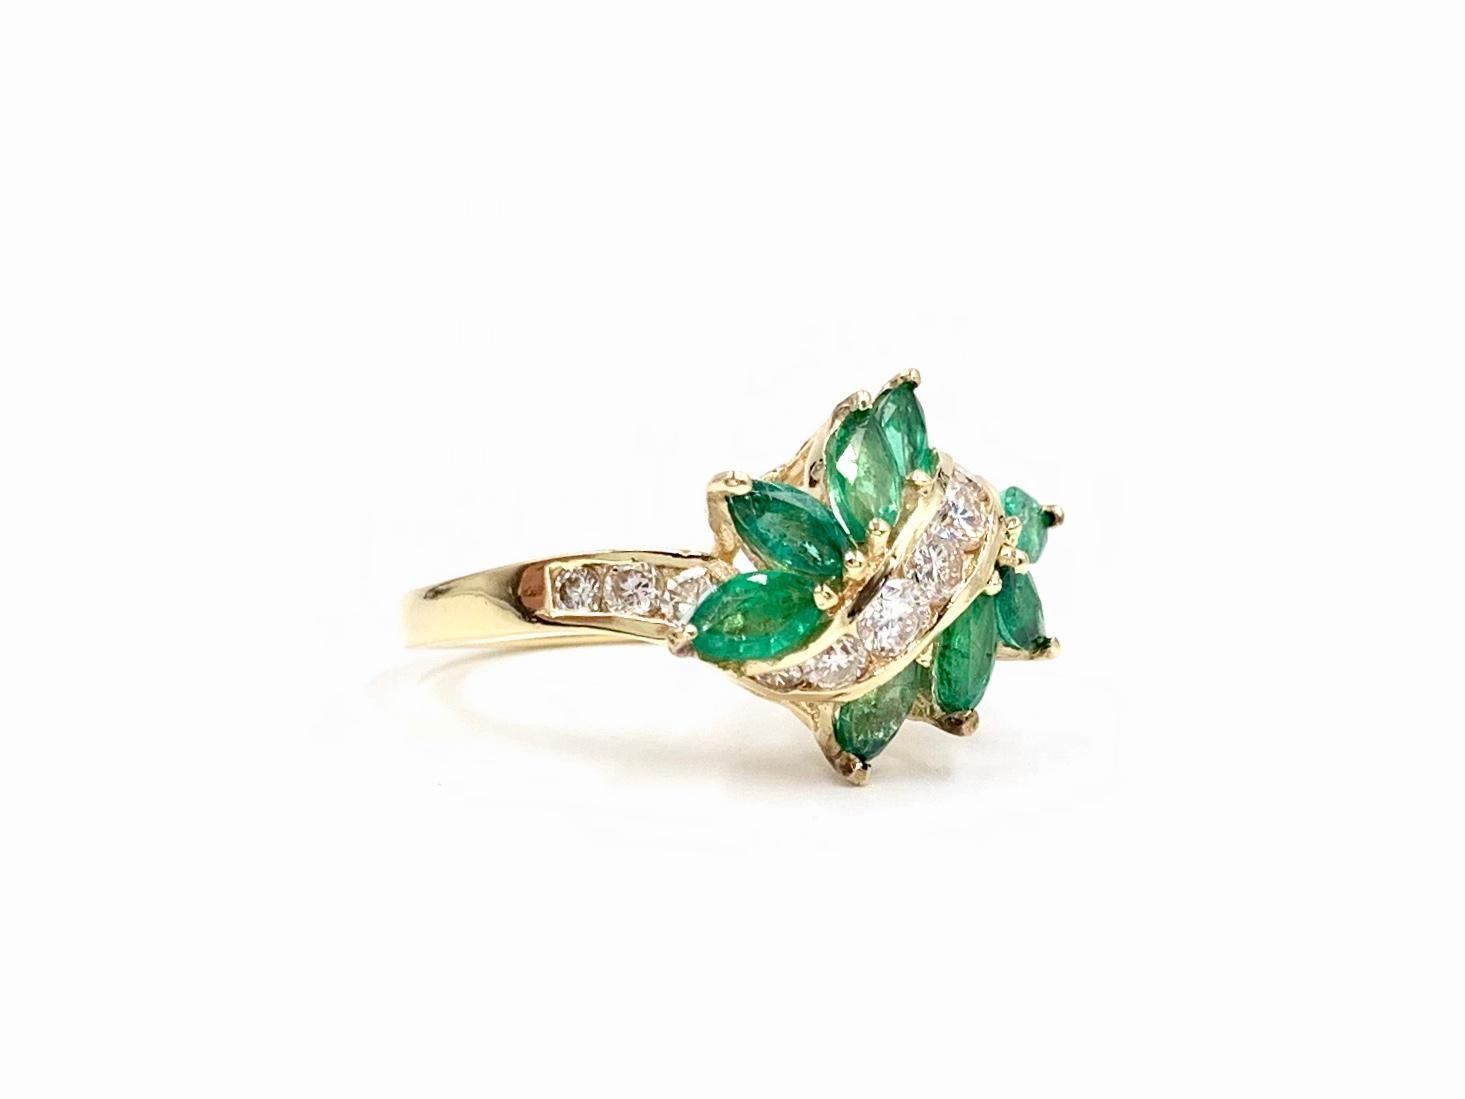 Circa 1970. This beautiful and understated spray style ring features approximately 1.30 carats of genuine well saturated marquise cut emeralds and approximately .60 carats of round brilliant diamonds, set in 14 karat yellow gold. Diamond quality is